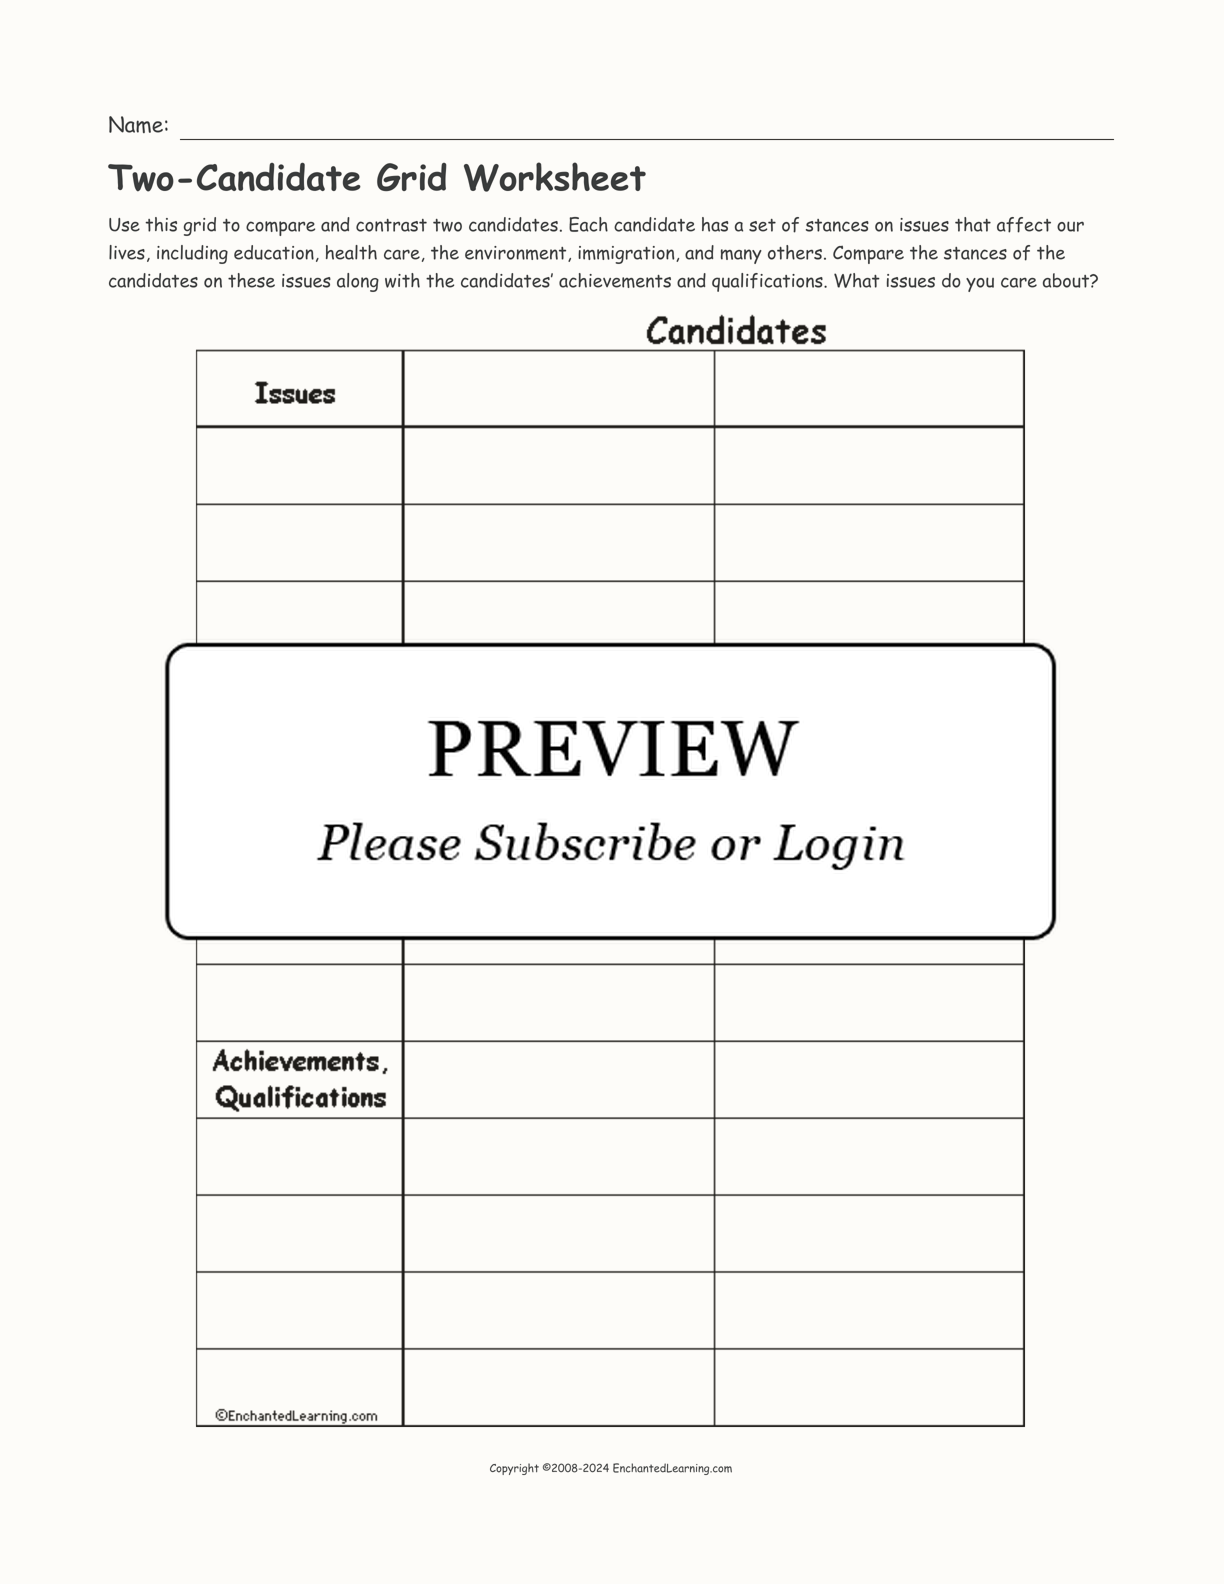 Two-Candidate Grid Worksheet interactive worksheet page 1